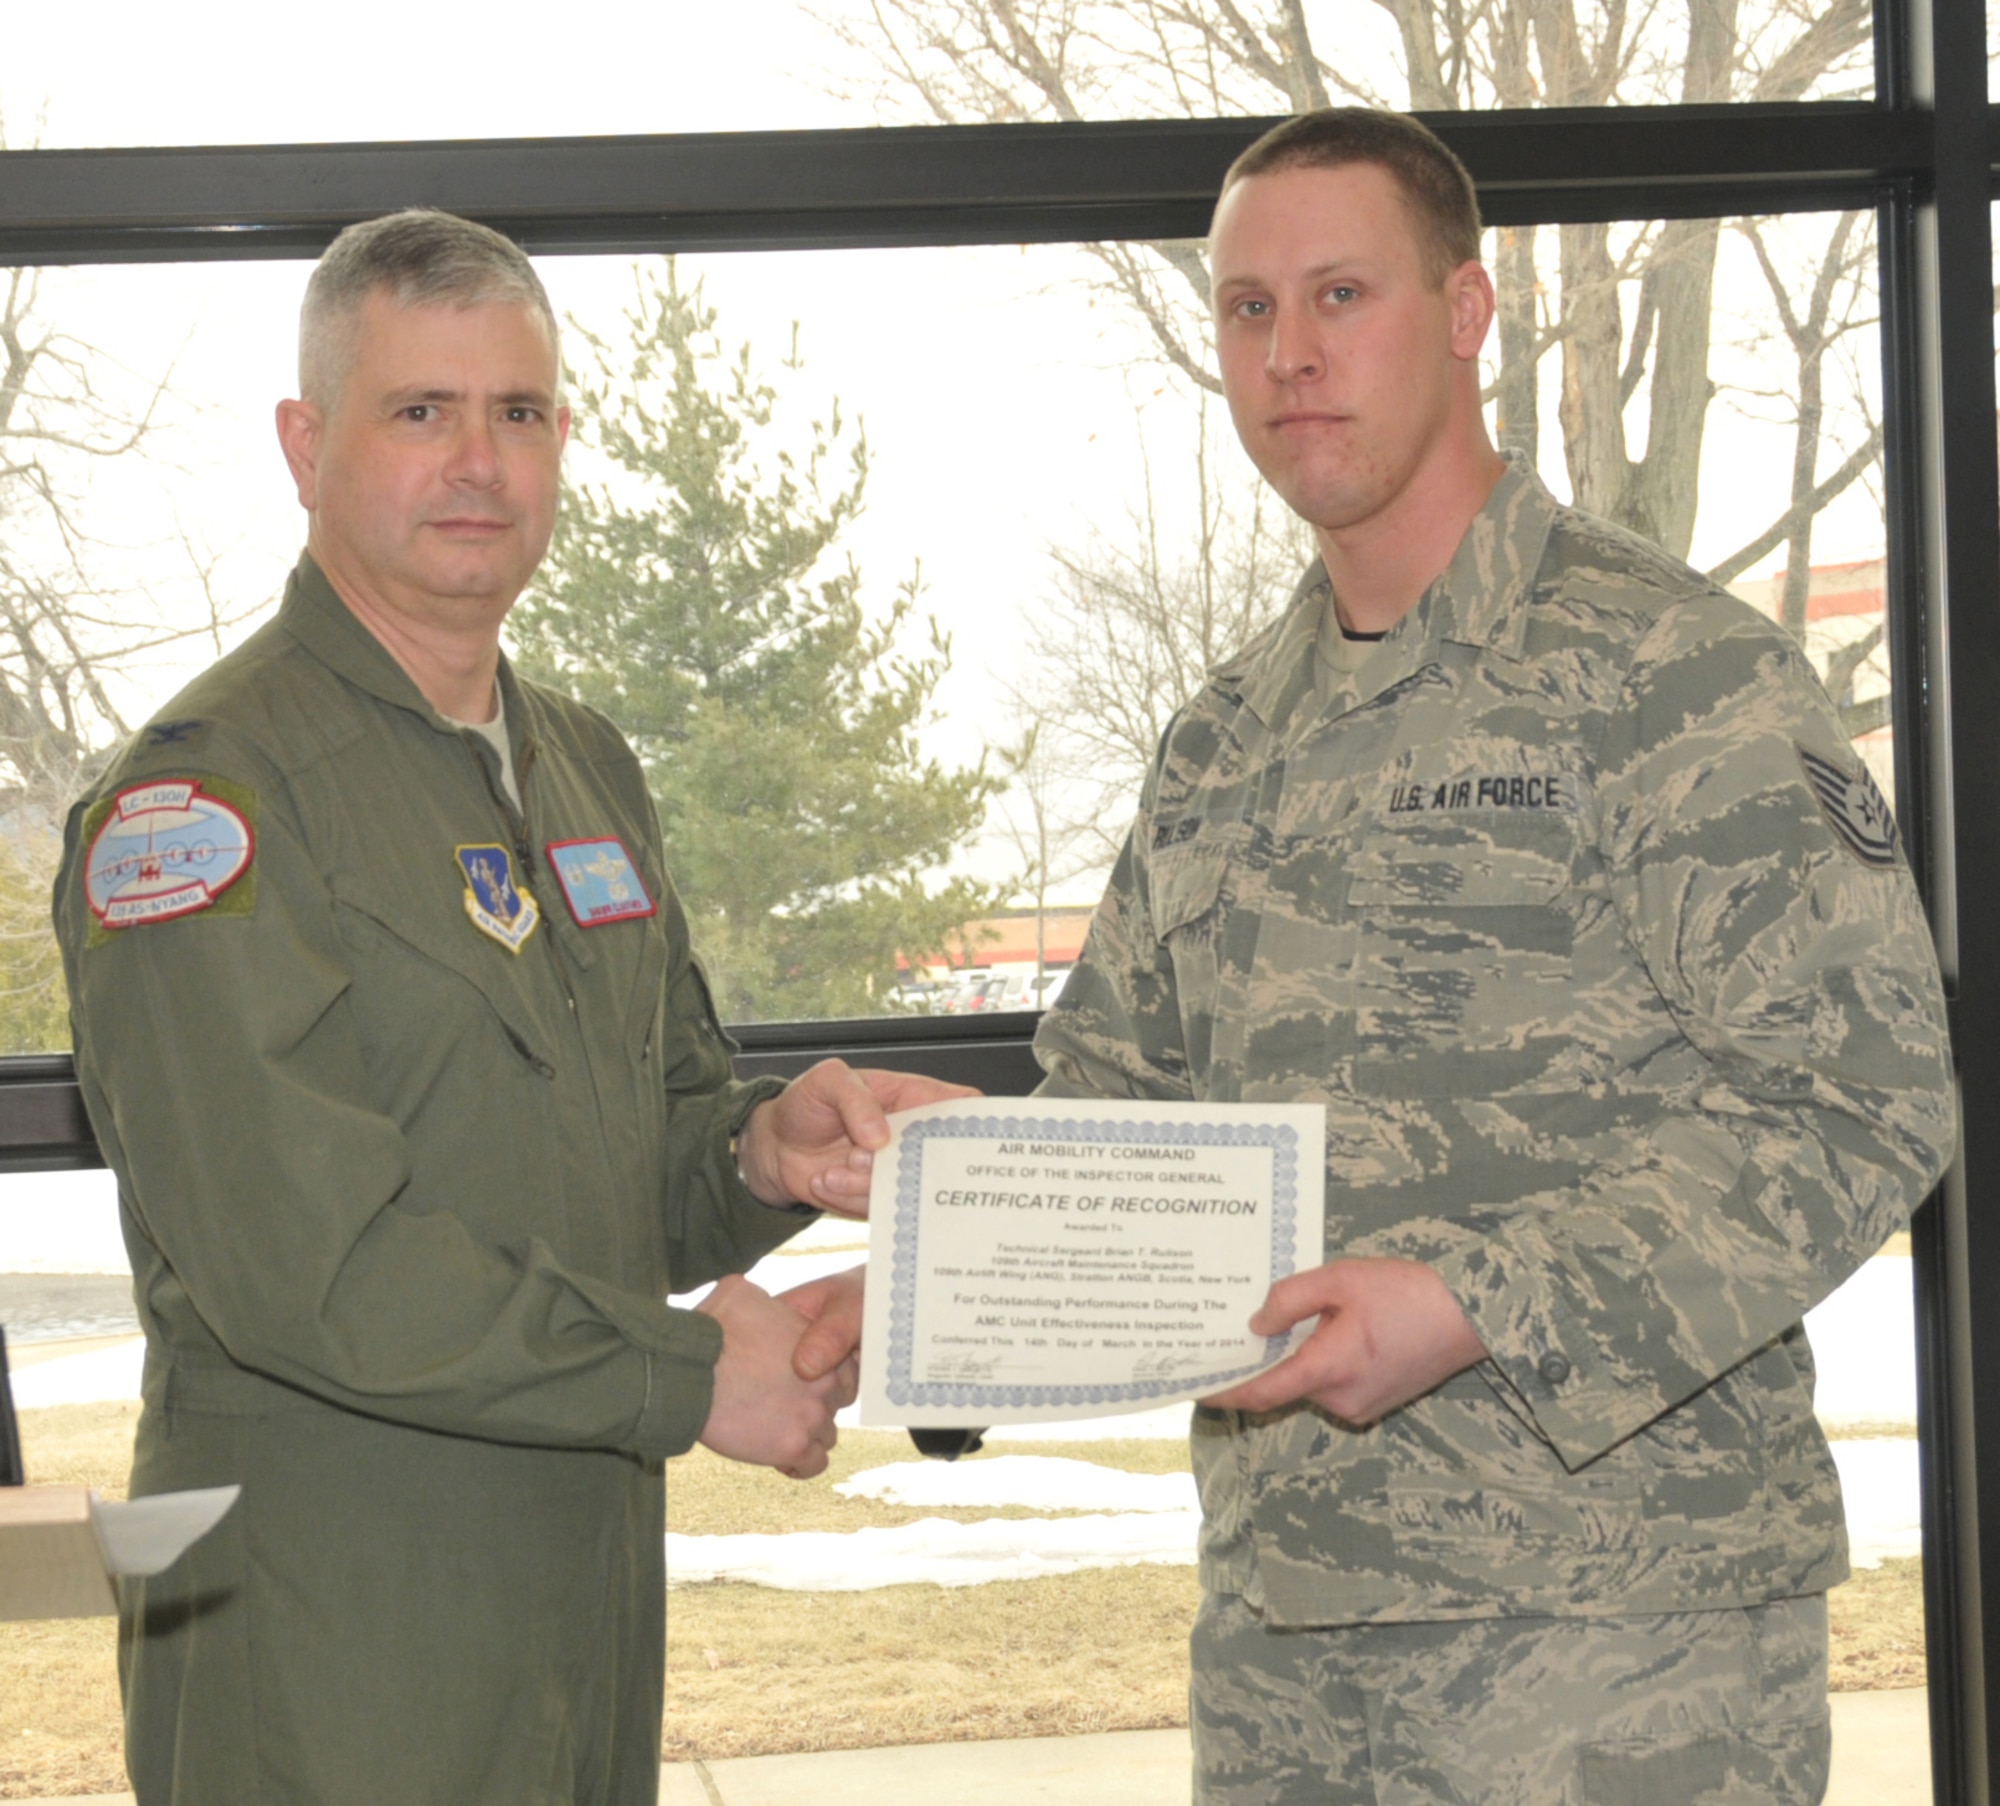 STRATTON AIR NATIONAL GUARD BASE, N.Y. -- Col. Shawn Clouthier (left), 109th Airlift Wing commander, presents Tech. Sgt. Brian Rulison with a certificate of recognition March 25, 2014, from Air Mobility Command for outstanding performance during the 109th AW's recent Unit Effectiveness Inspection. Rulison is assigned to the 109th Aircraft Maintenance Squadron. (Air National Guard photo by Master Sgt. William Gizara/Released)